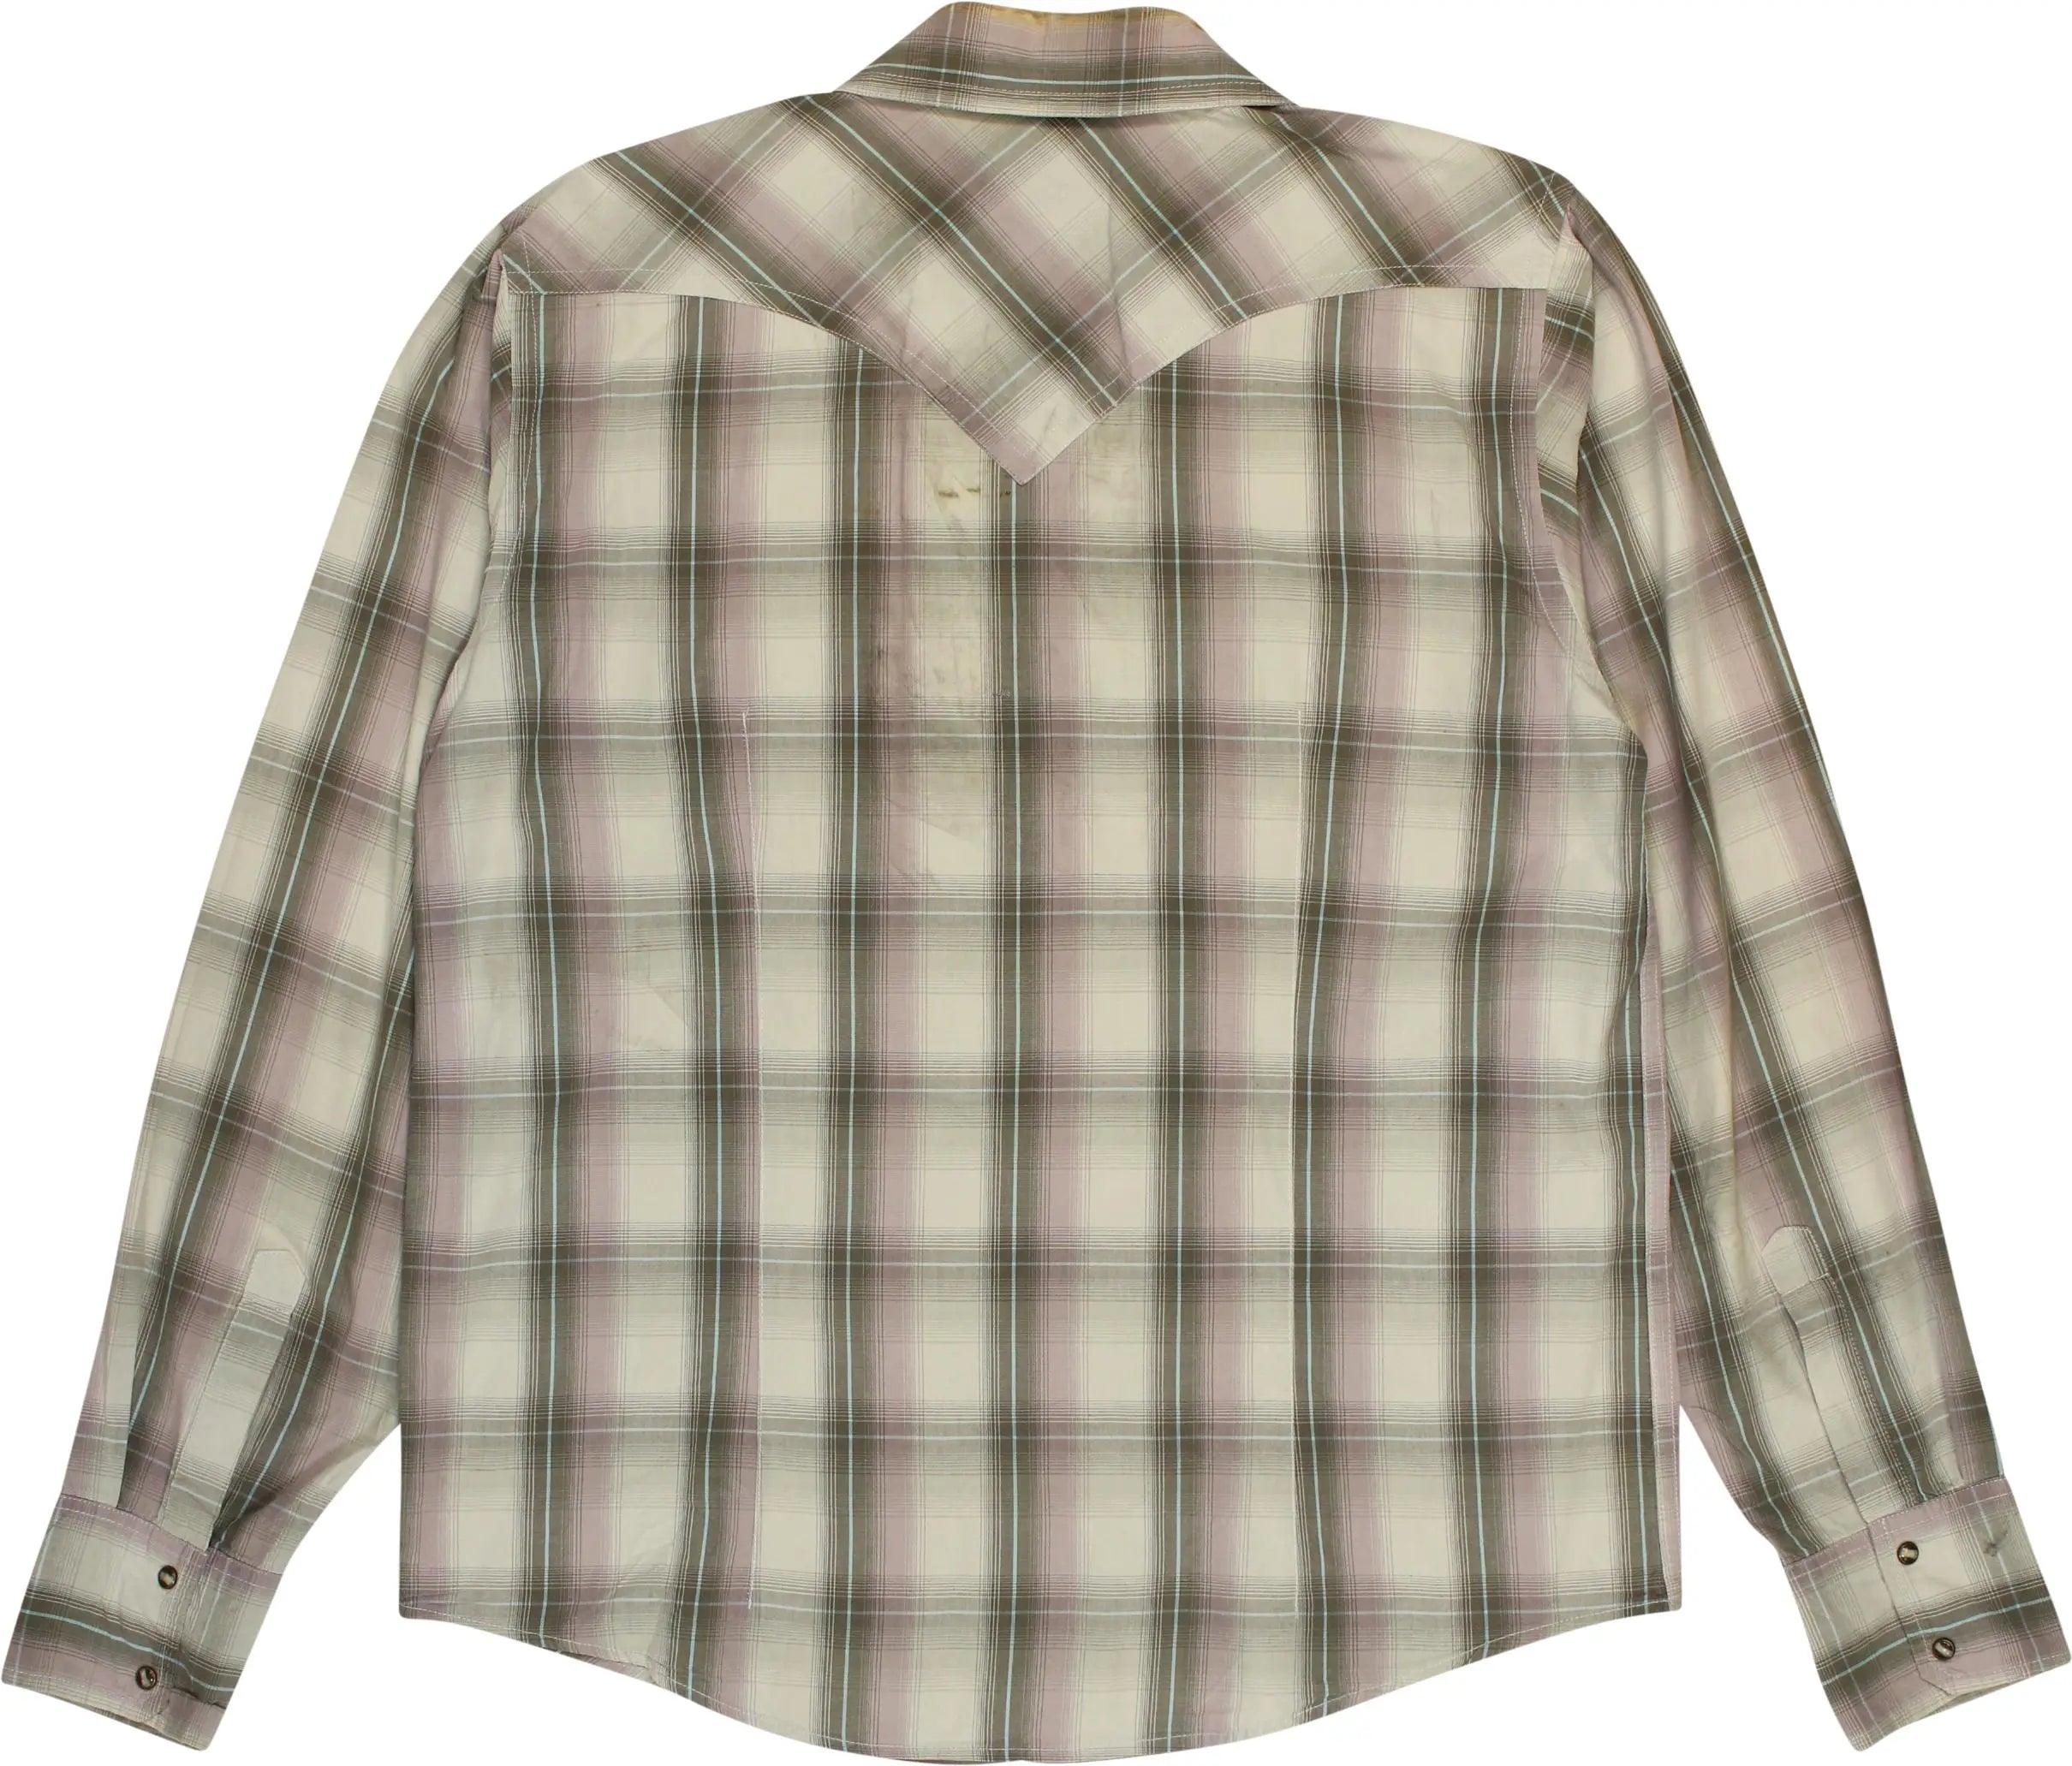 Of the Earth - Checkered Shirt- ThriftTale.com - Vintage and second handclothing